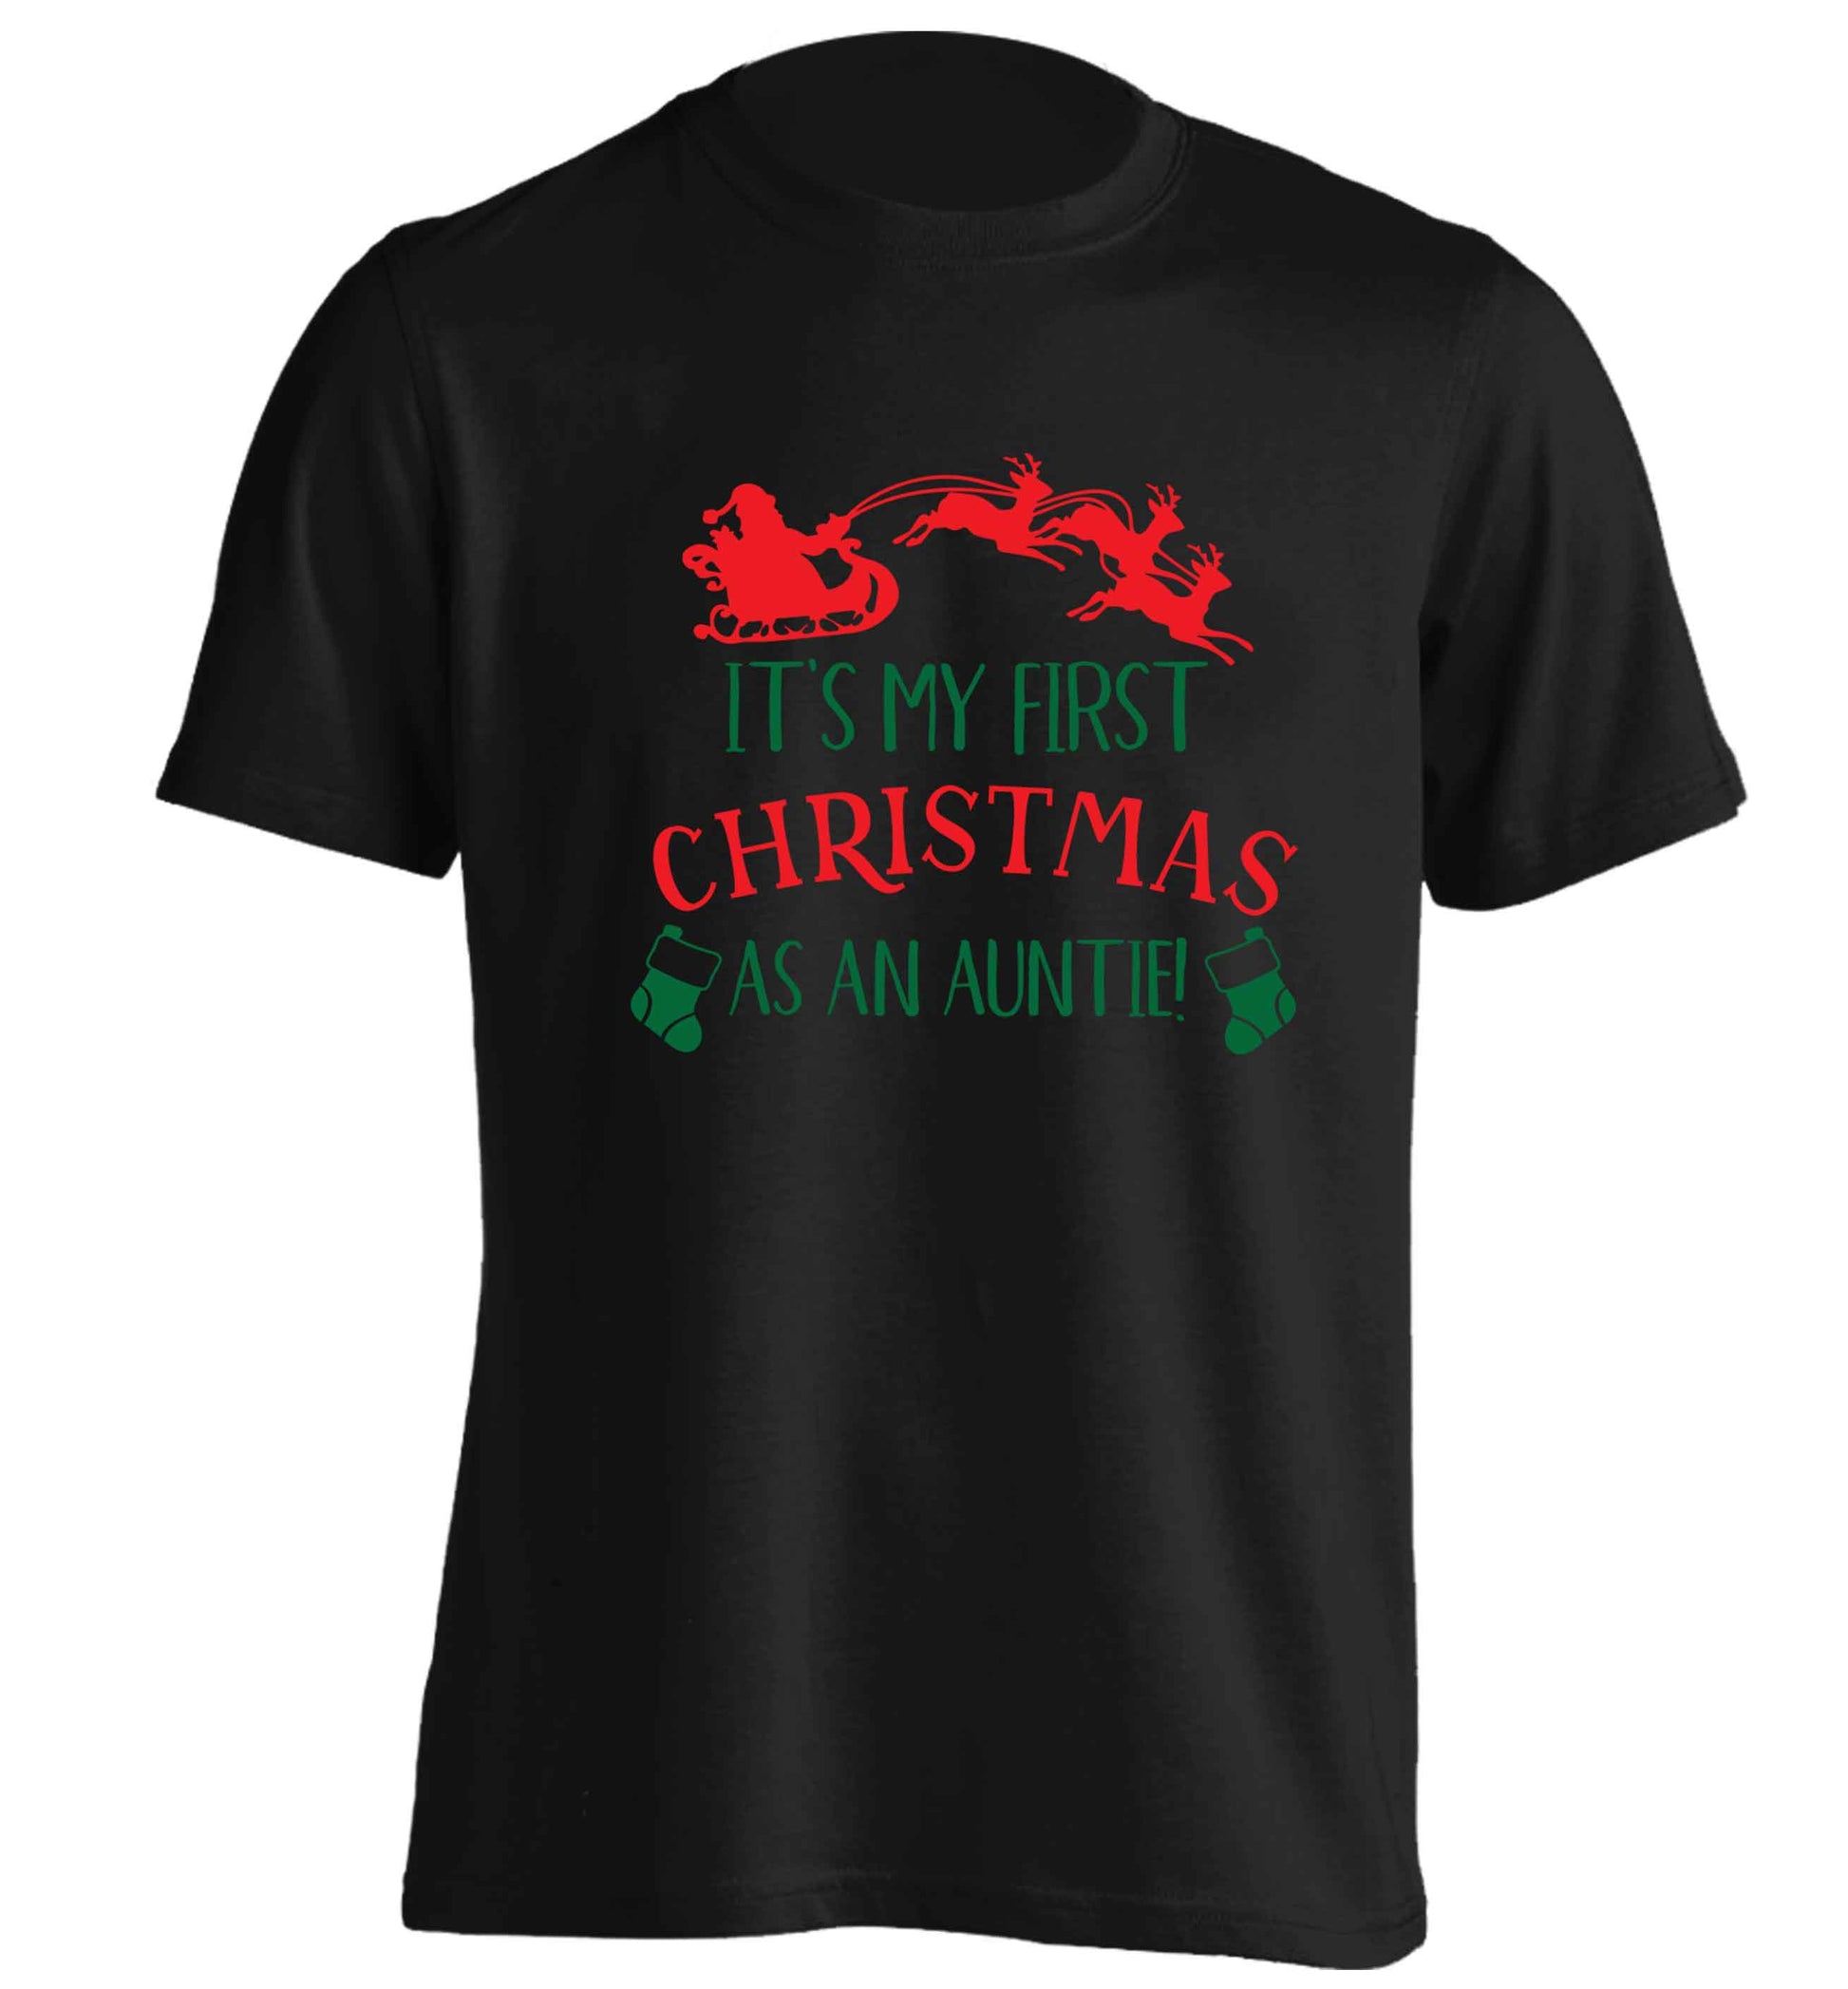 It's my first Christmas as an auntie! adults unisex black Tshirt 2XL